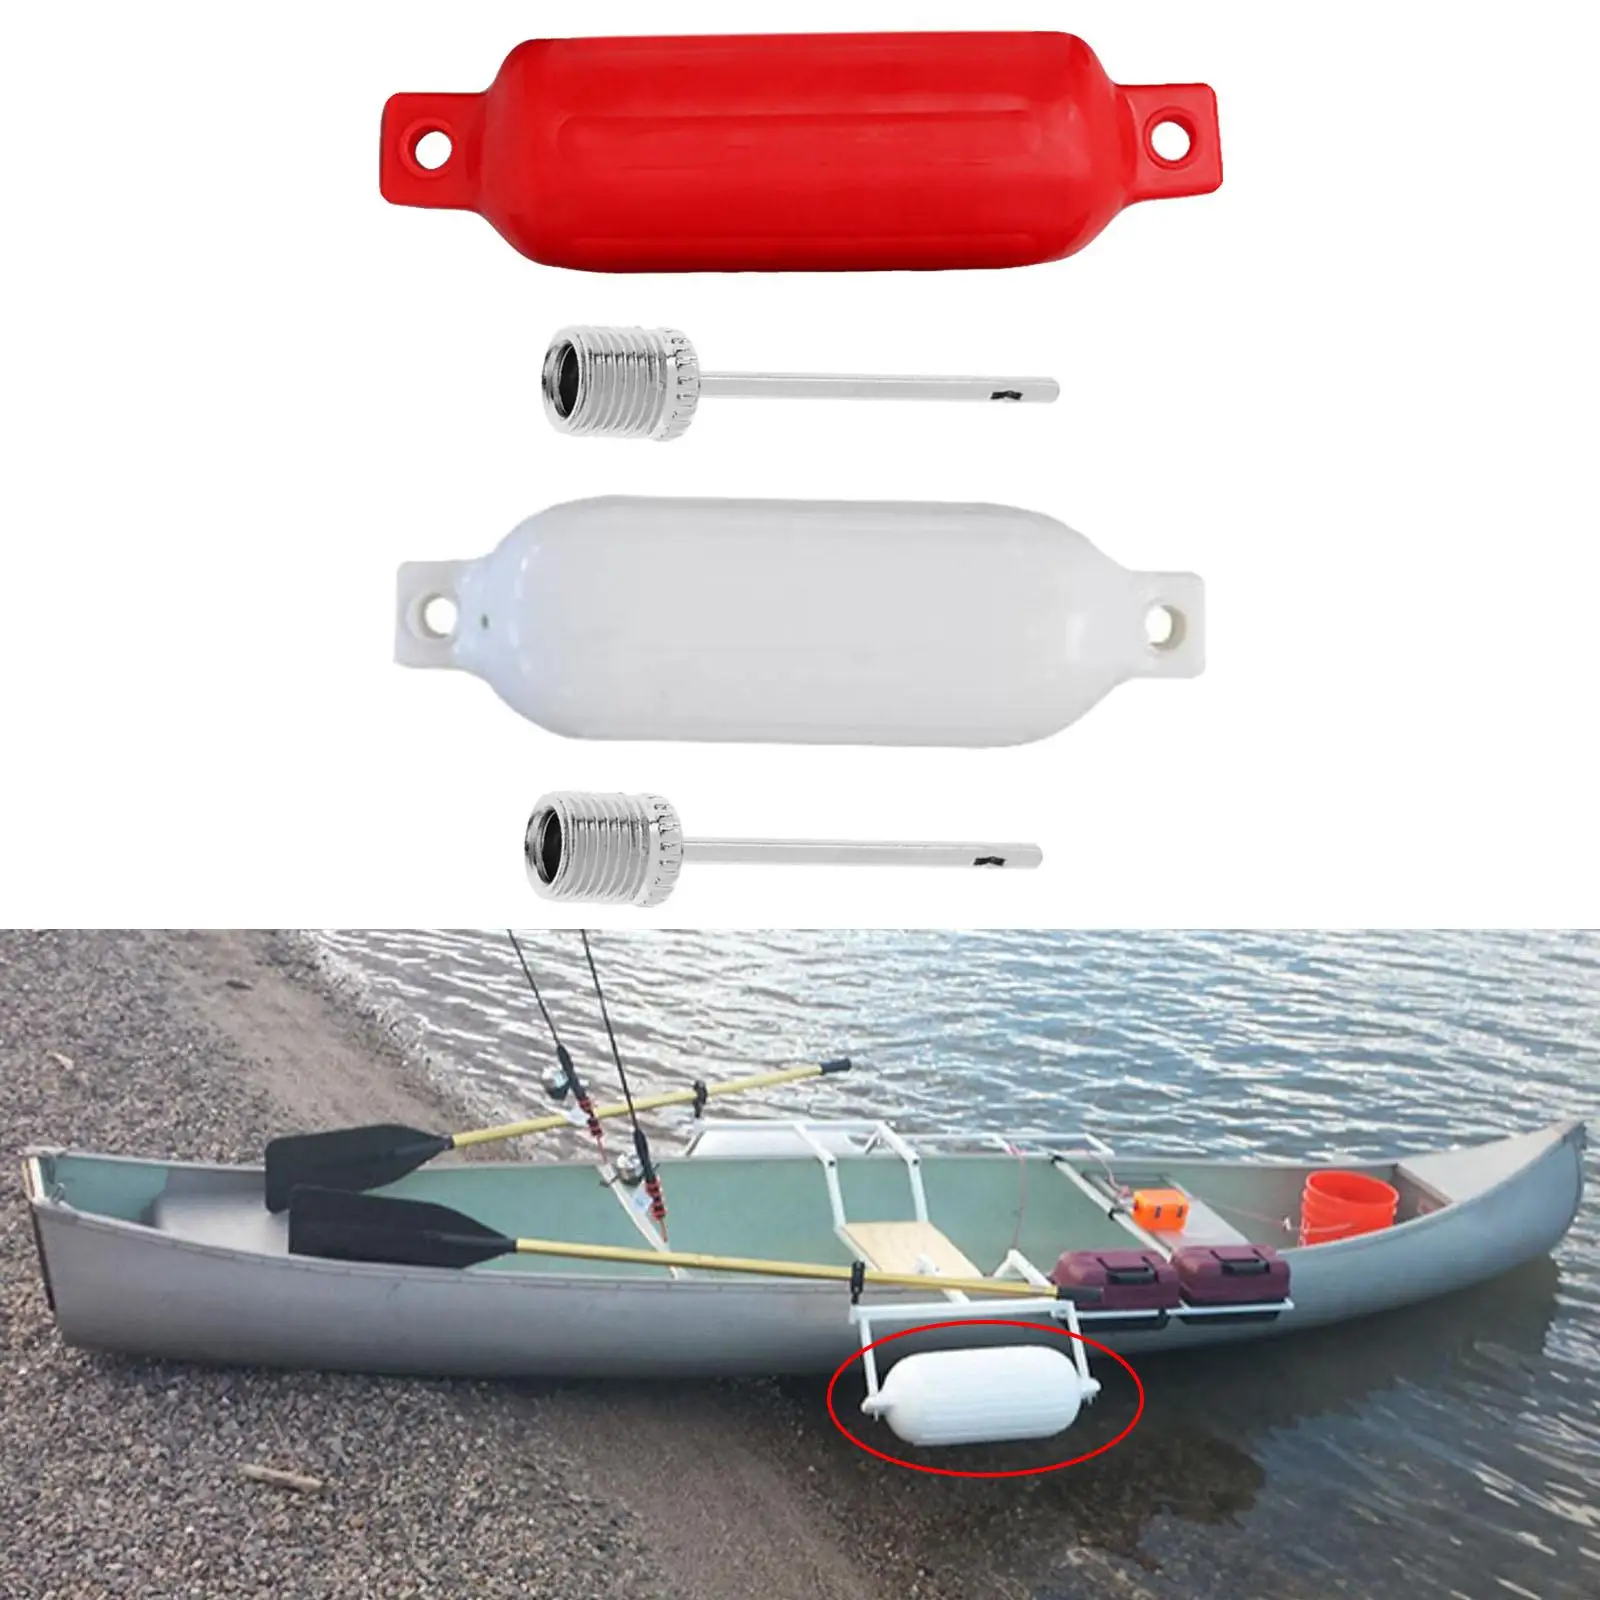 Marine Boat, Boat Bumpers Protection Come with Boat Bumpers for Fishing Boats Sailboats Pontoon